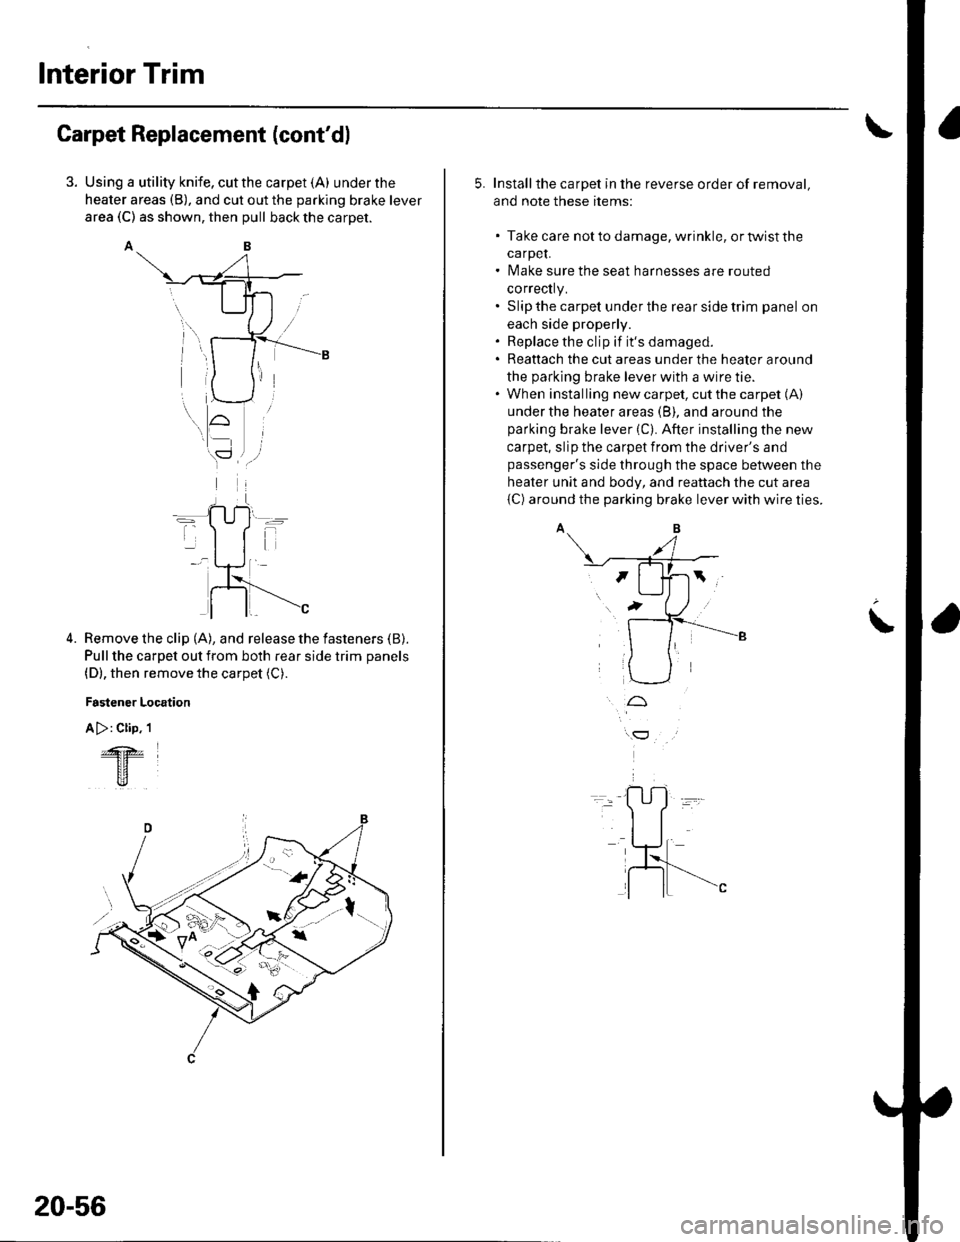 HONDA CIVIC 2003 7.G Workshop Manual Interior Trim
Carpet Replacement (contdl
Using a utility knife, cut the carpet (A) under the
heater areas (B), and cut out the parking brake lever
area (C) as shown, then pull back the carpet.
AB
Rem